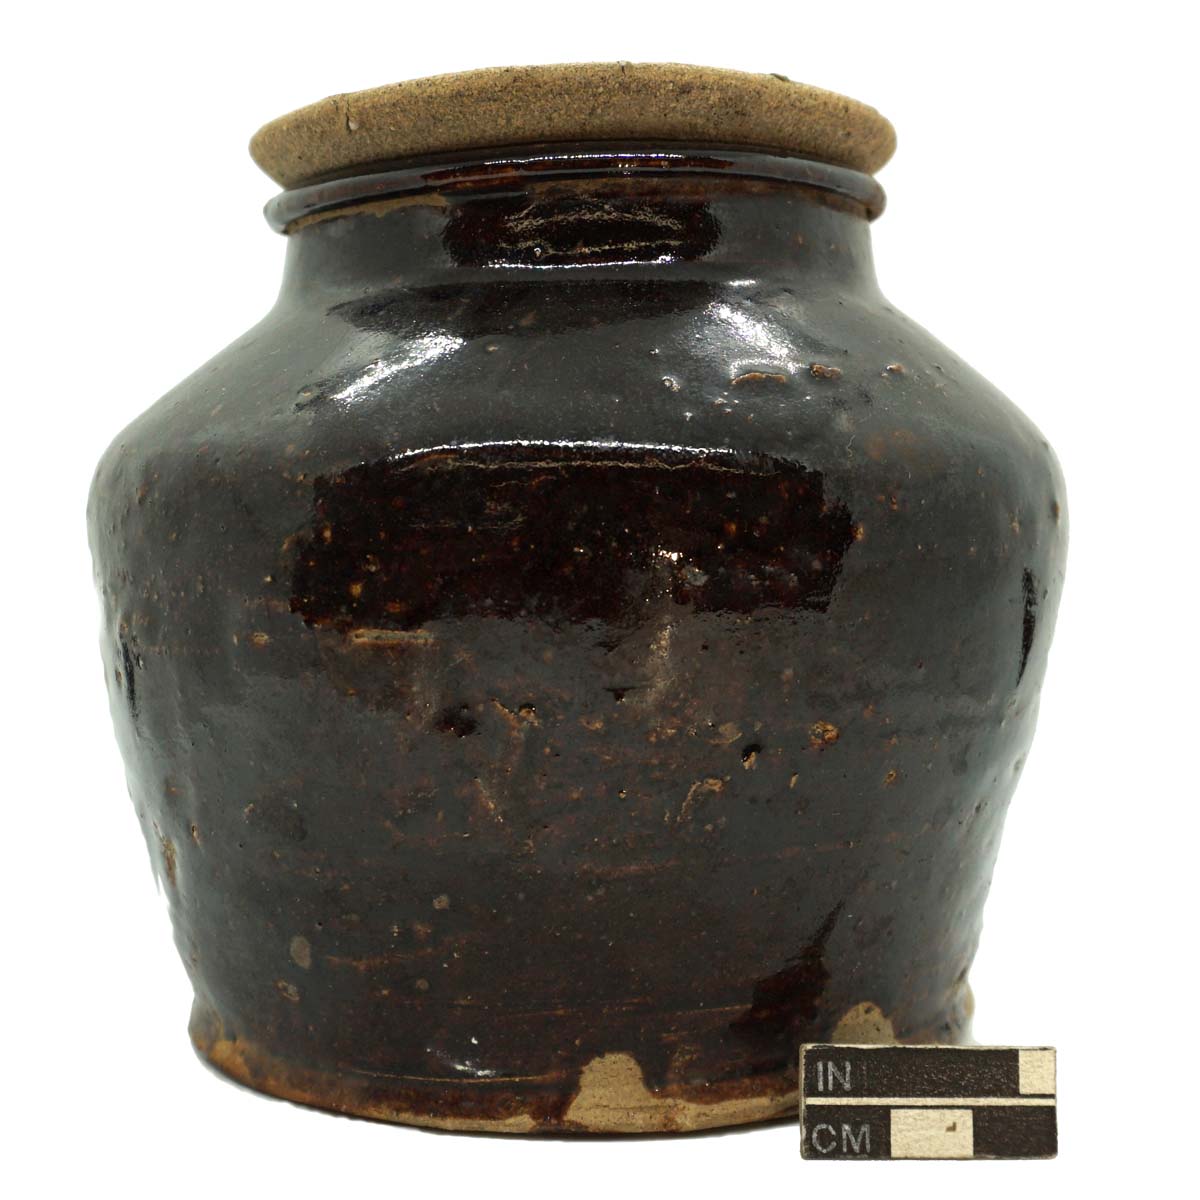 Wide-mouthed jar, Chinese brown-glazed stoneware, and lid.